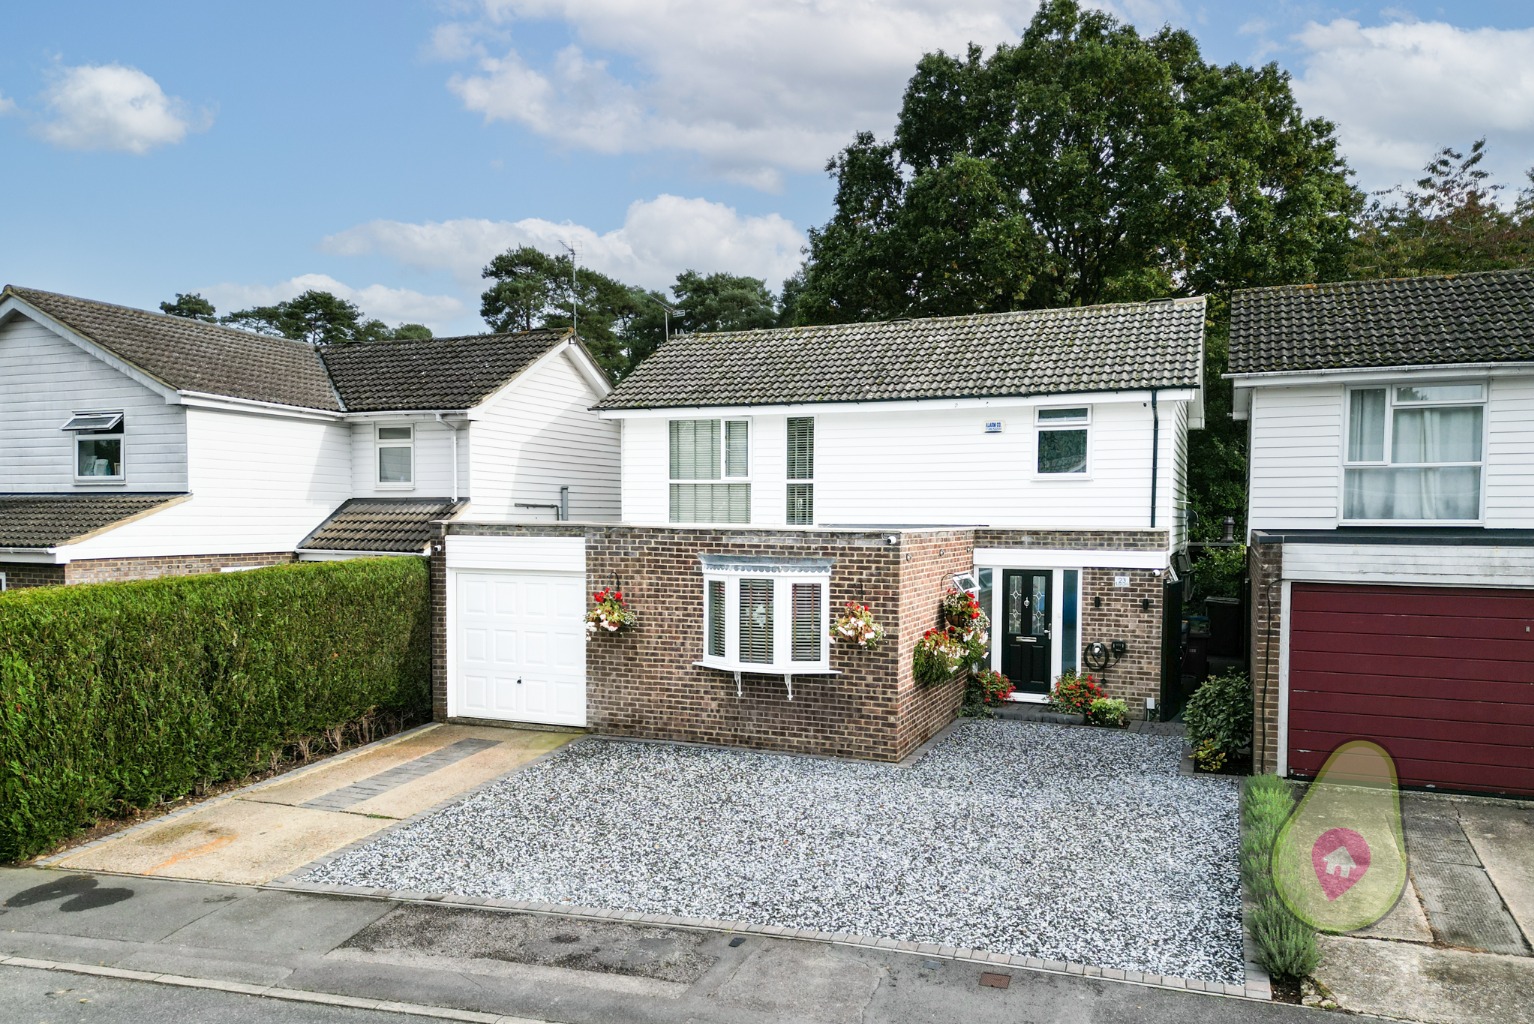 3 bed detached house for sale in Sarum, Bracknell  - Property Image 1